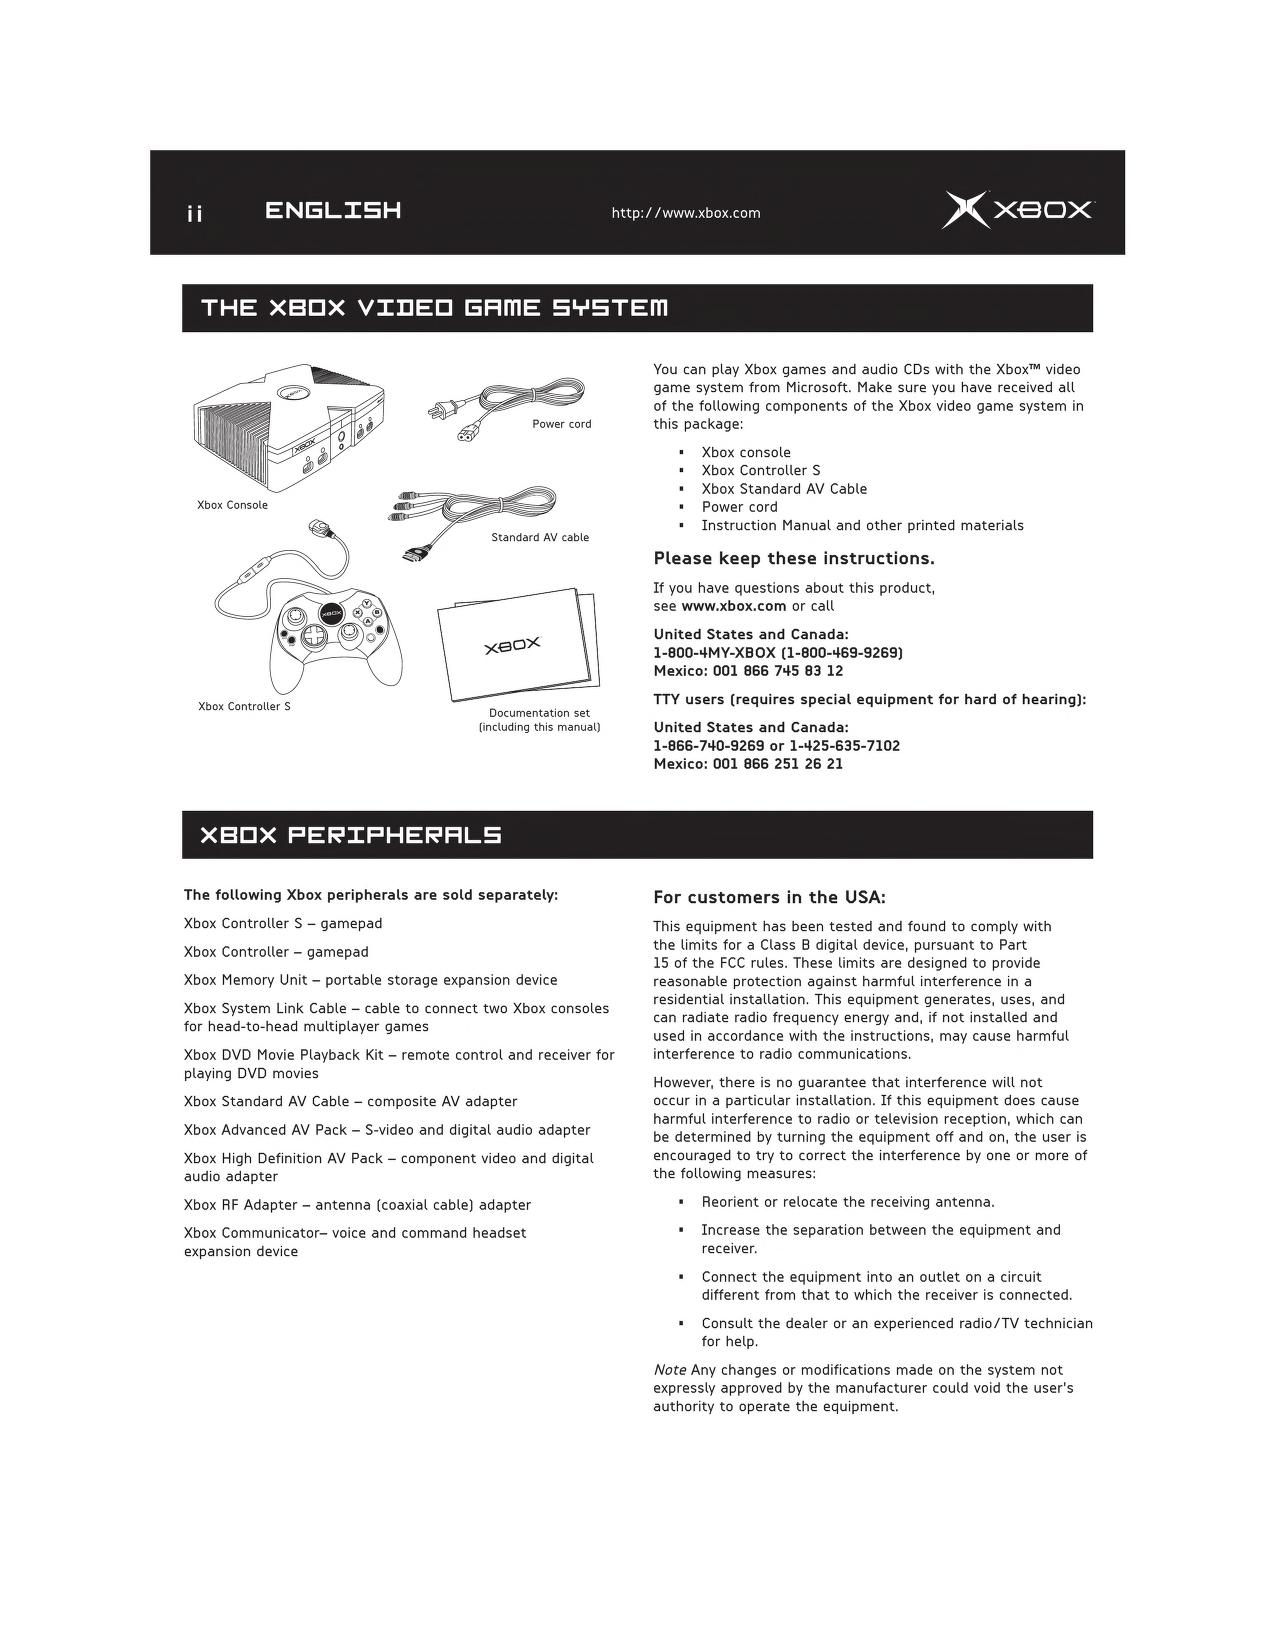 Stoel residentie Kruis aan XBOX Manual: XBOX Console Instruction Manual (2001)(Microsoft) : Free  Download, Borrow, and Streaming : Internet Archive